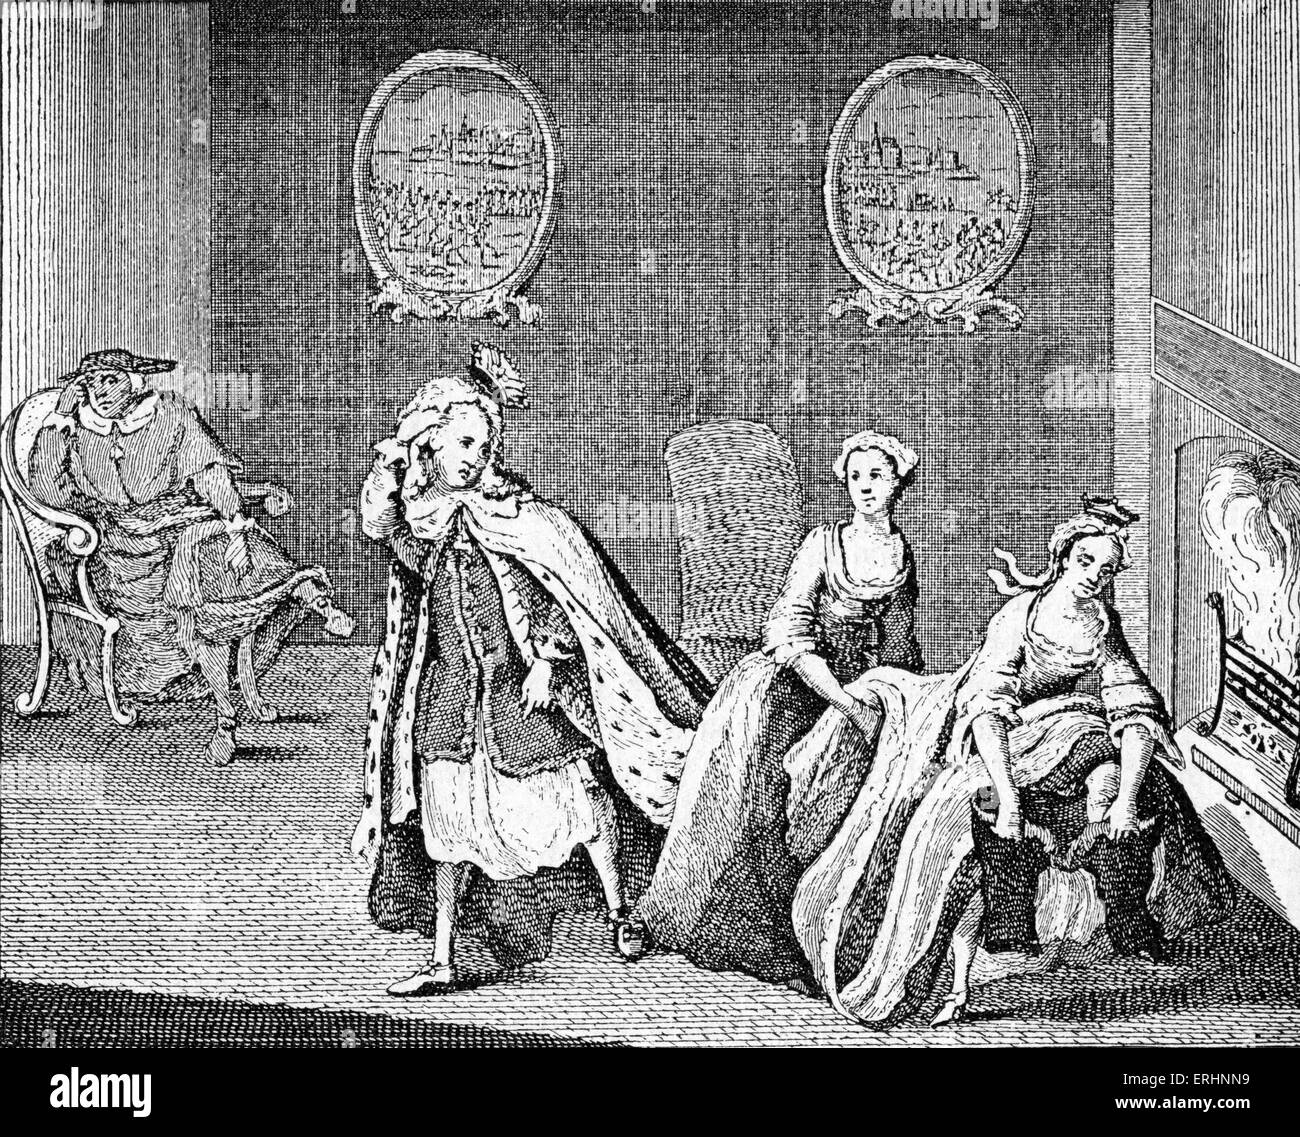 Maria Theresa (or Theresia) putting on a pair of Bavarian trousers - English political caricature, artist unknown. Opposition to Maria Theresia 's accession to the throne led to the War of the Austrian Succession in 1740. MT, Archduchess of Austria: 13 May 1717 - 29 November 1780. Stock Photo